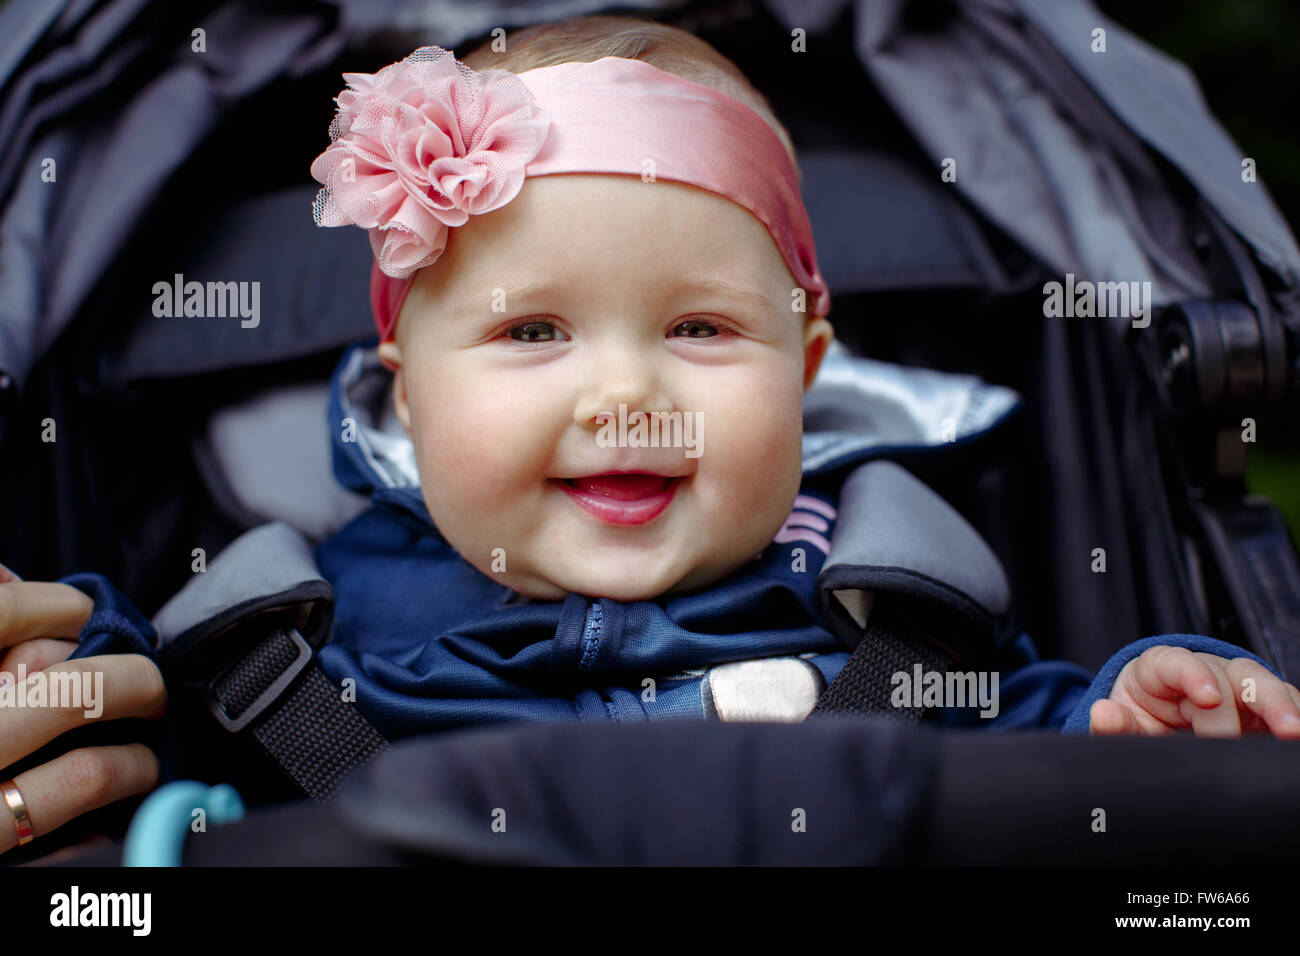 Baby sitting in a baby carriage, holding my mother's finger, a bandage on his head with a pink flower. Baby smiling and looking Stock Photo